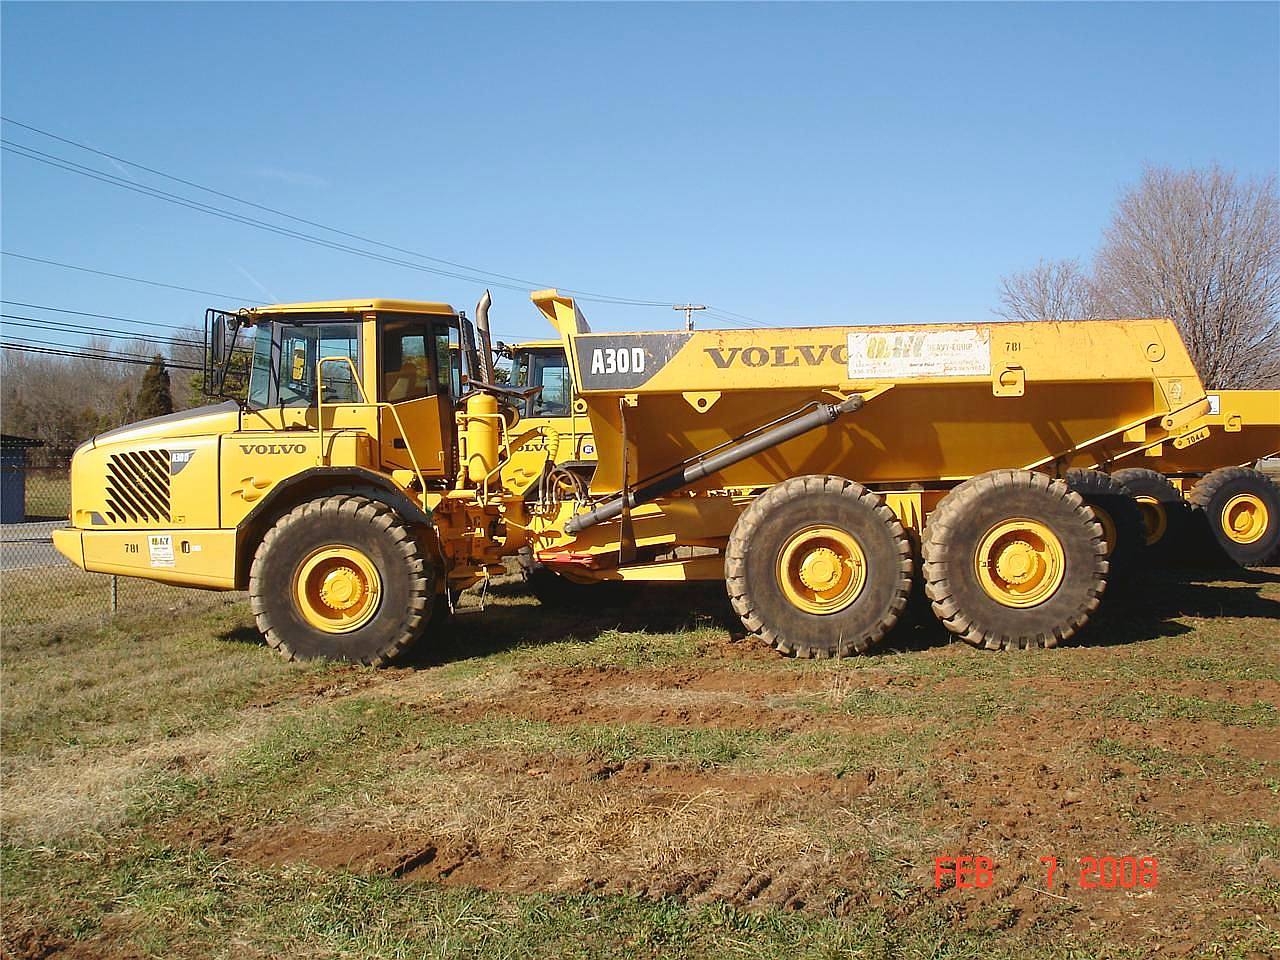 On this page we present you the most successful photo gallery of Volvo A30D